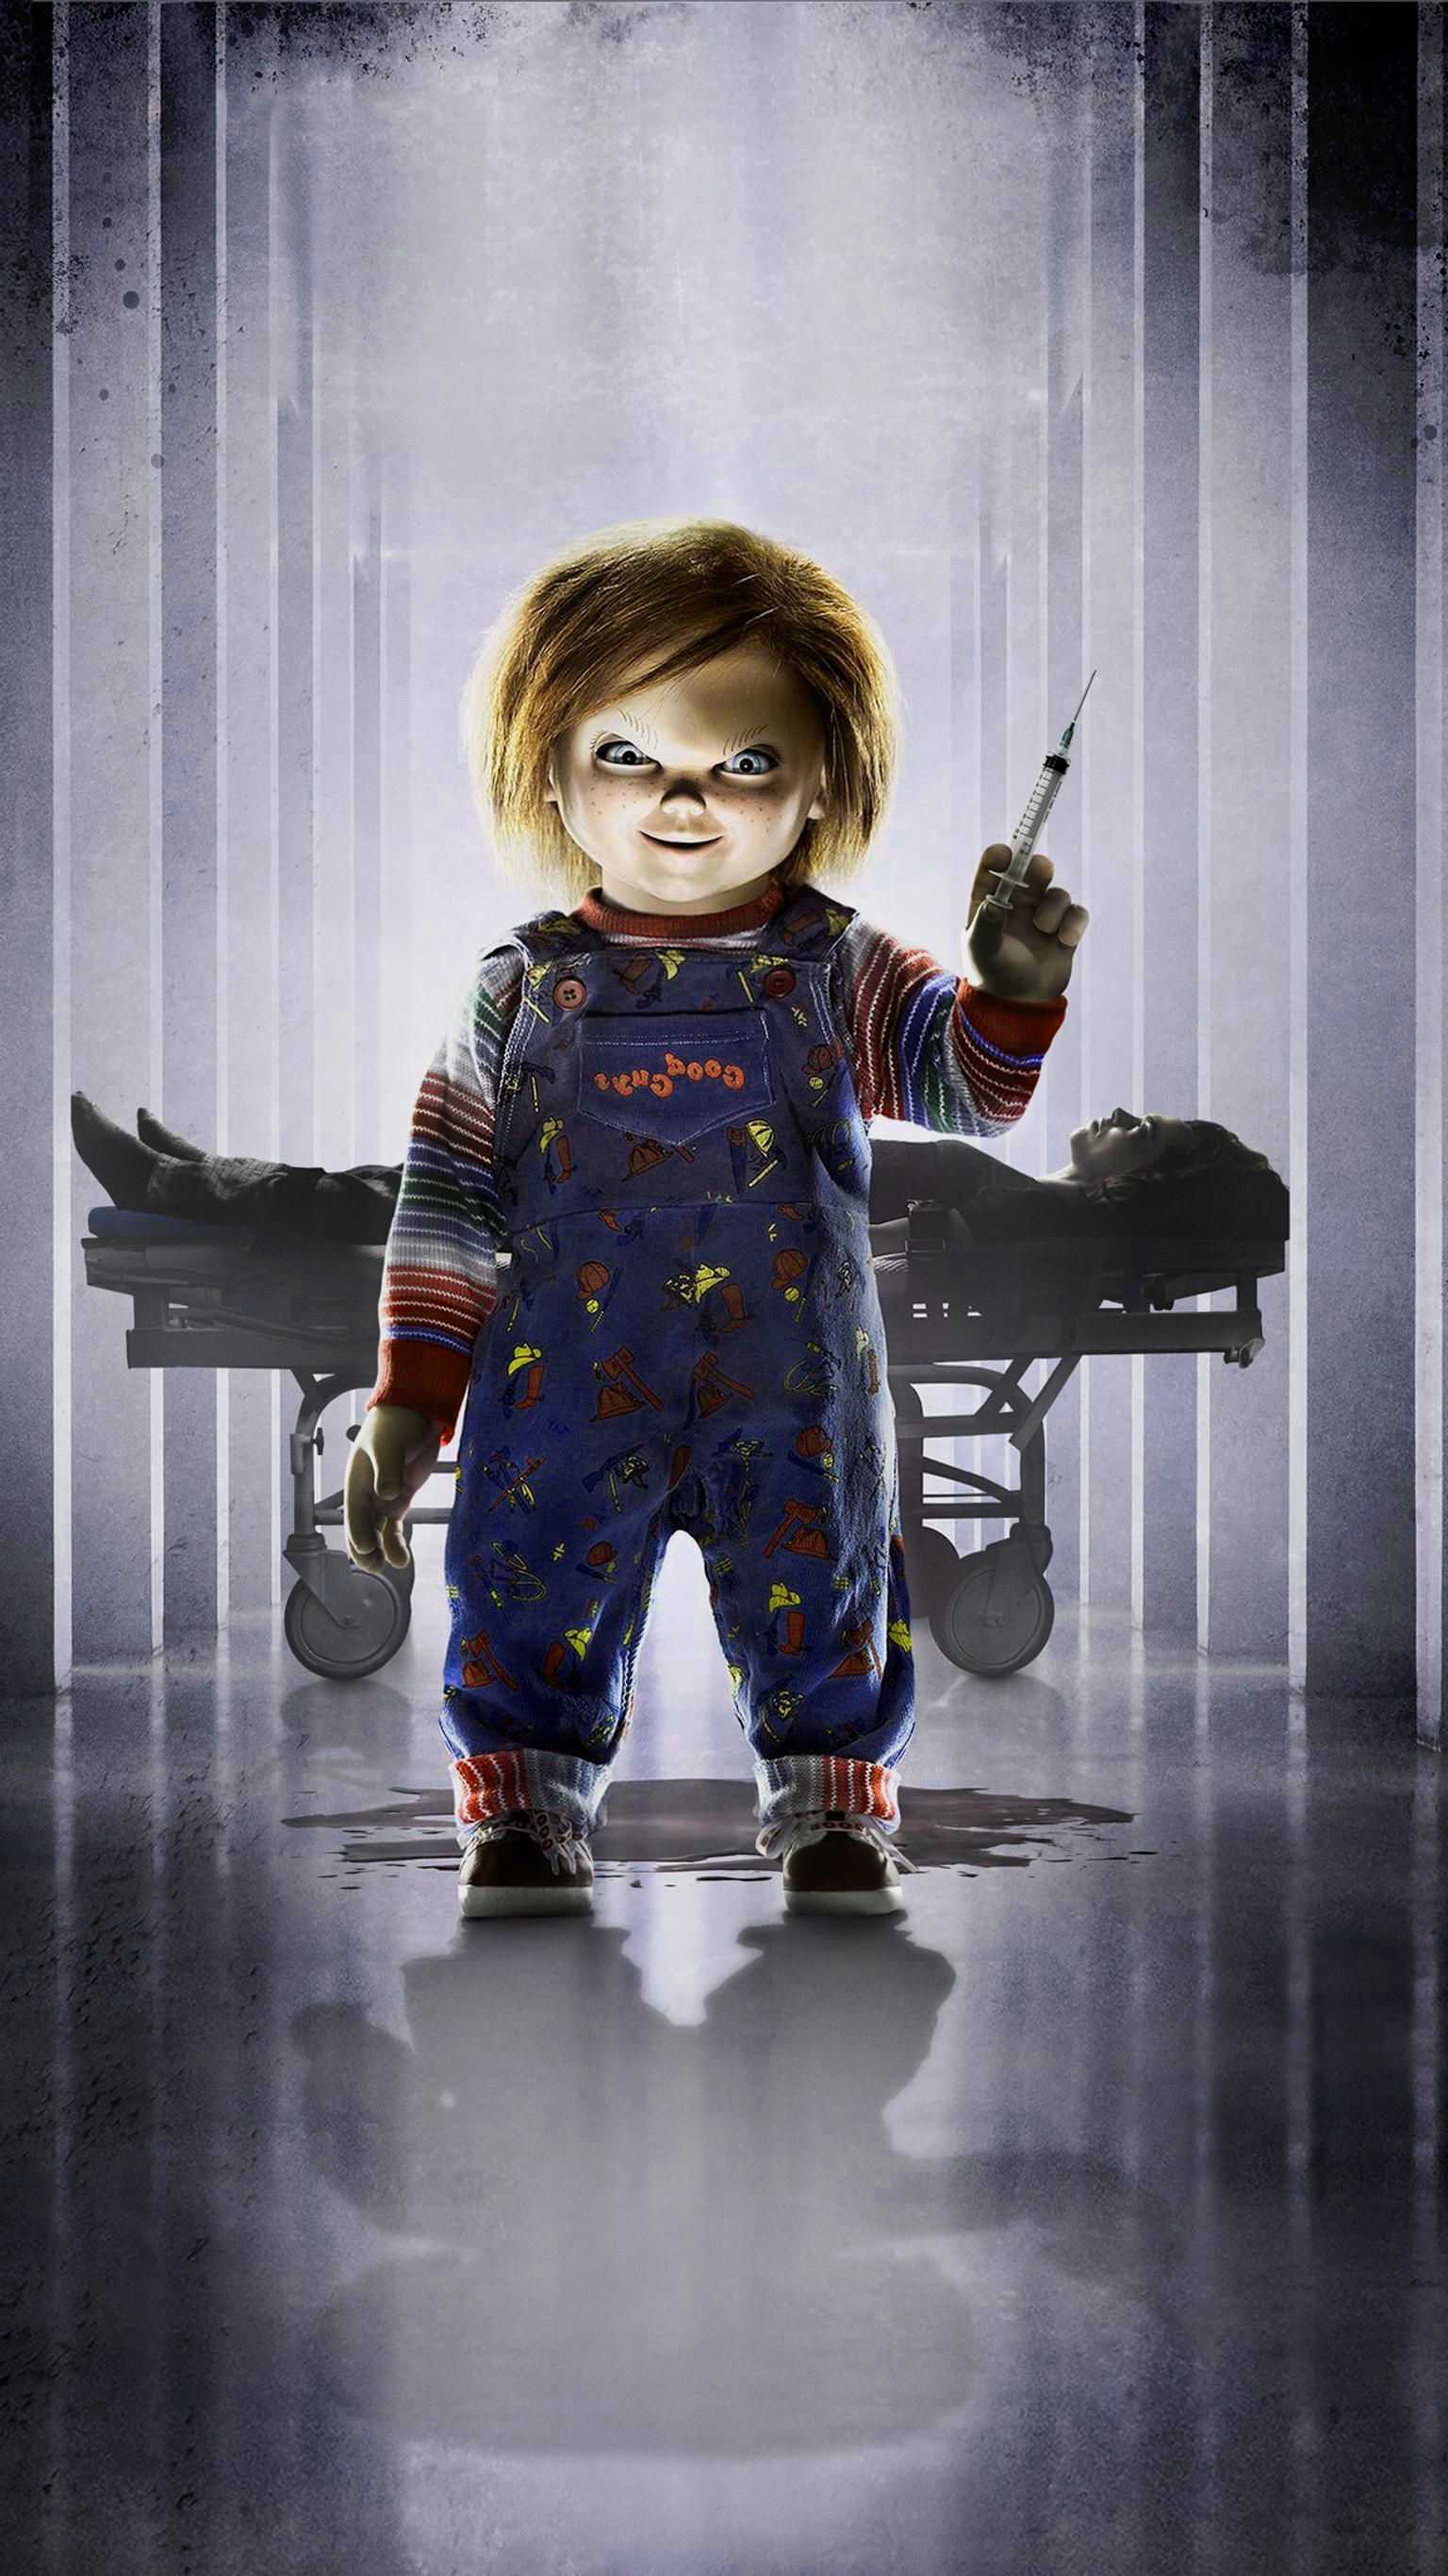 Download Chucky sweetie wallpaper by societys2cent  71  Free on ZEDGE  now Browse millions of popular 3d Wallpapers and R  Scary wallpaper  Chucky Chucky doll